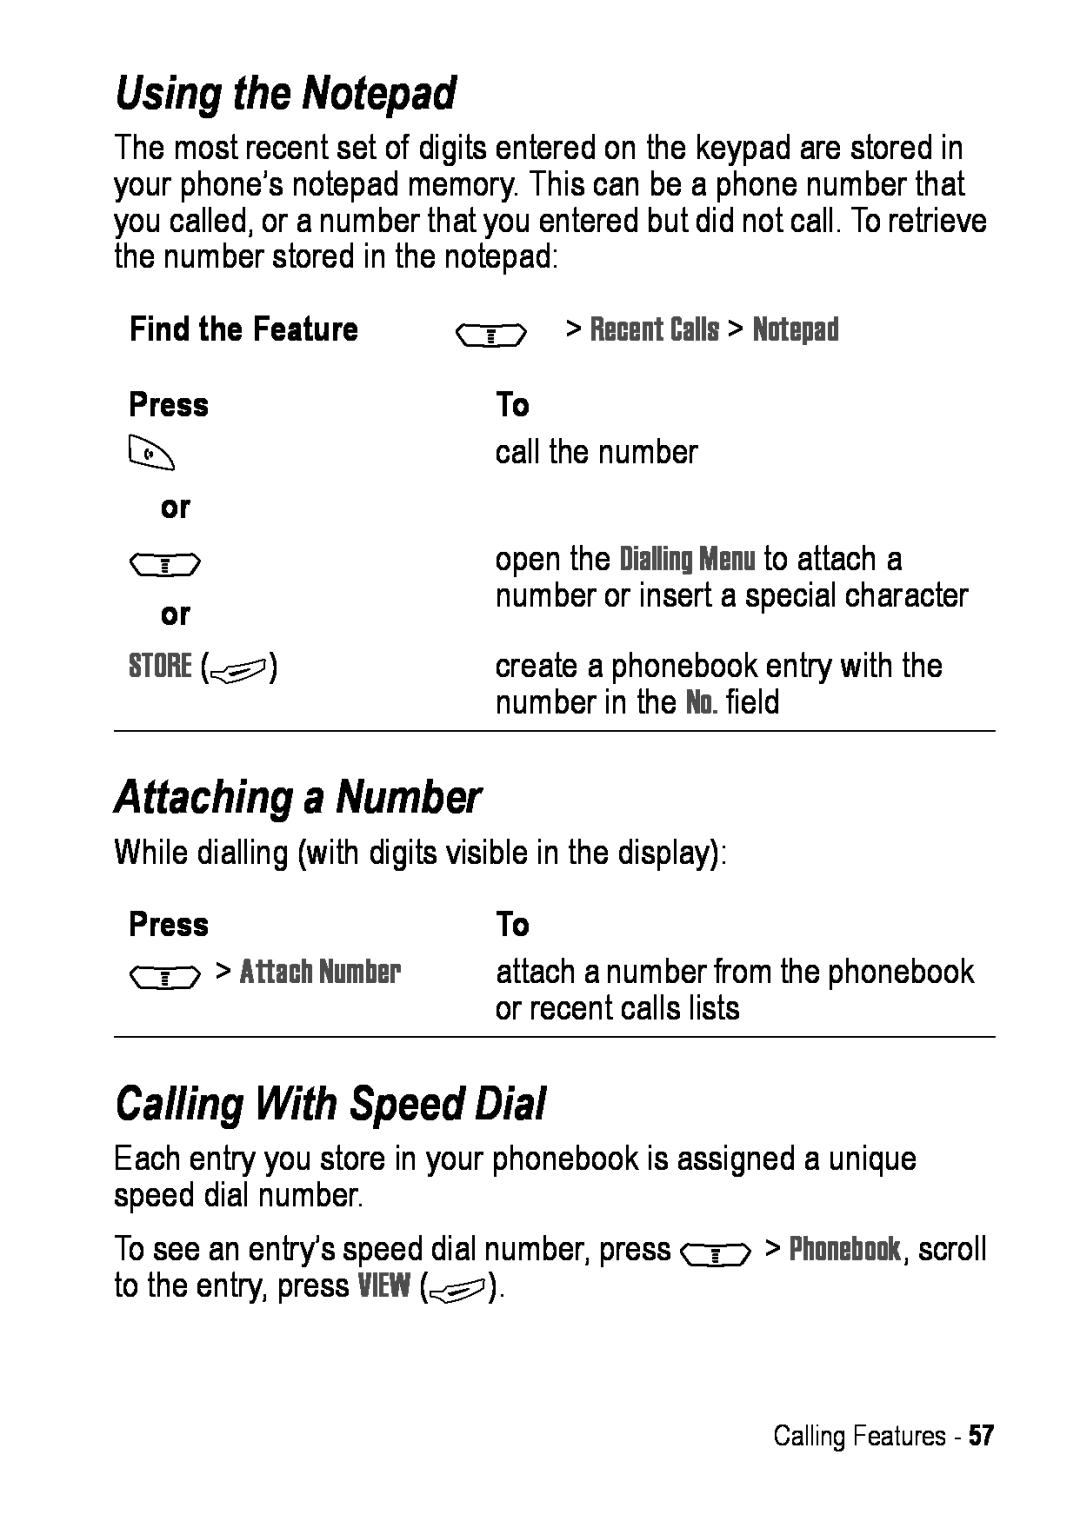 Motorola C390 manual Using the Notepad, Attaching a Number, Calling With Speed Dial, Store + 